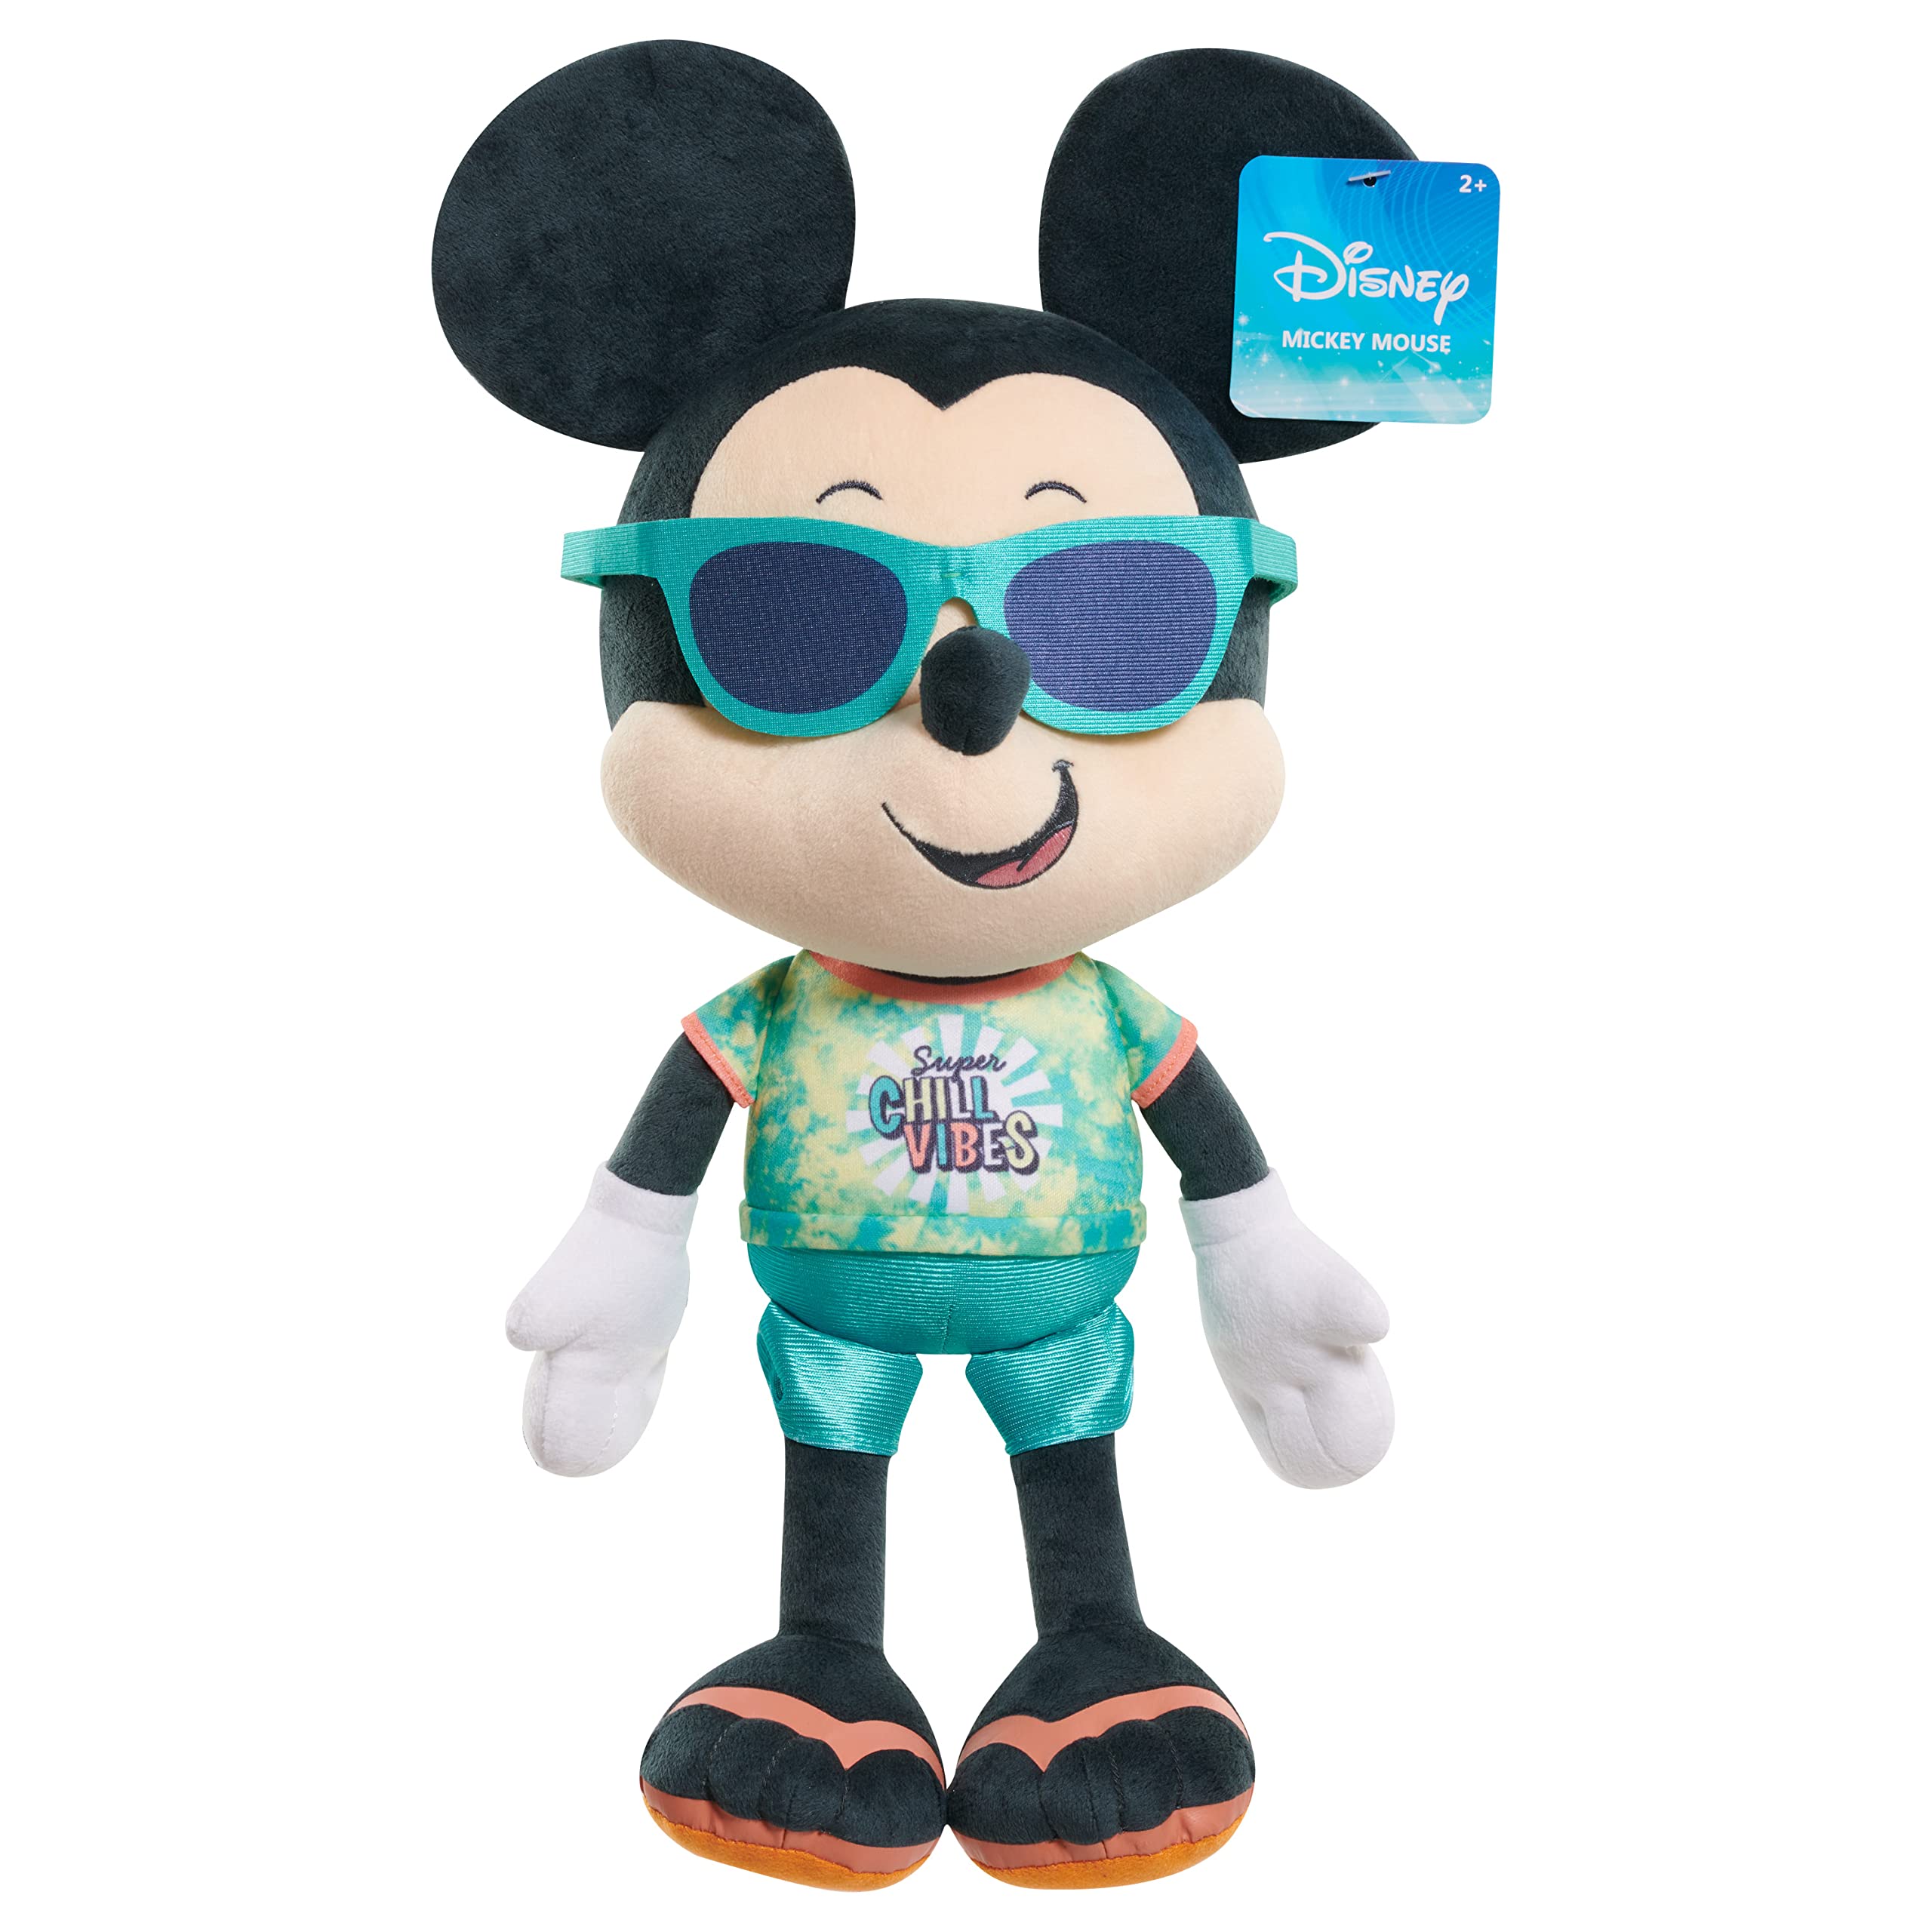 17" Just Play Disney Street Beach Officially Licensed Large Plush Mickey Mouse $6.26 + Free Shipping w/ Prime or on $35+